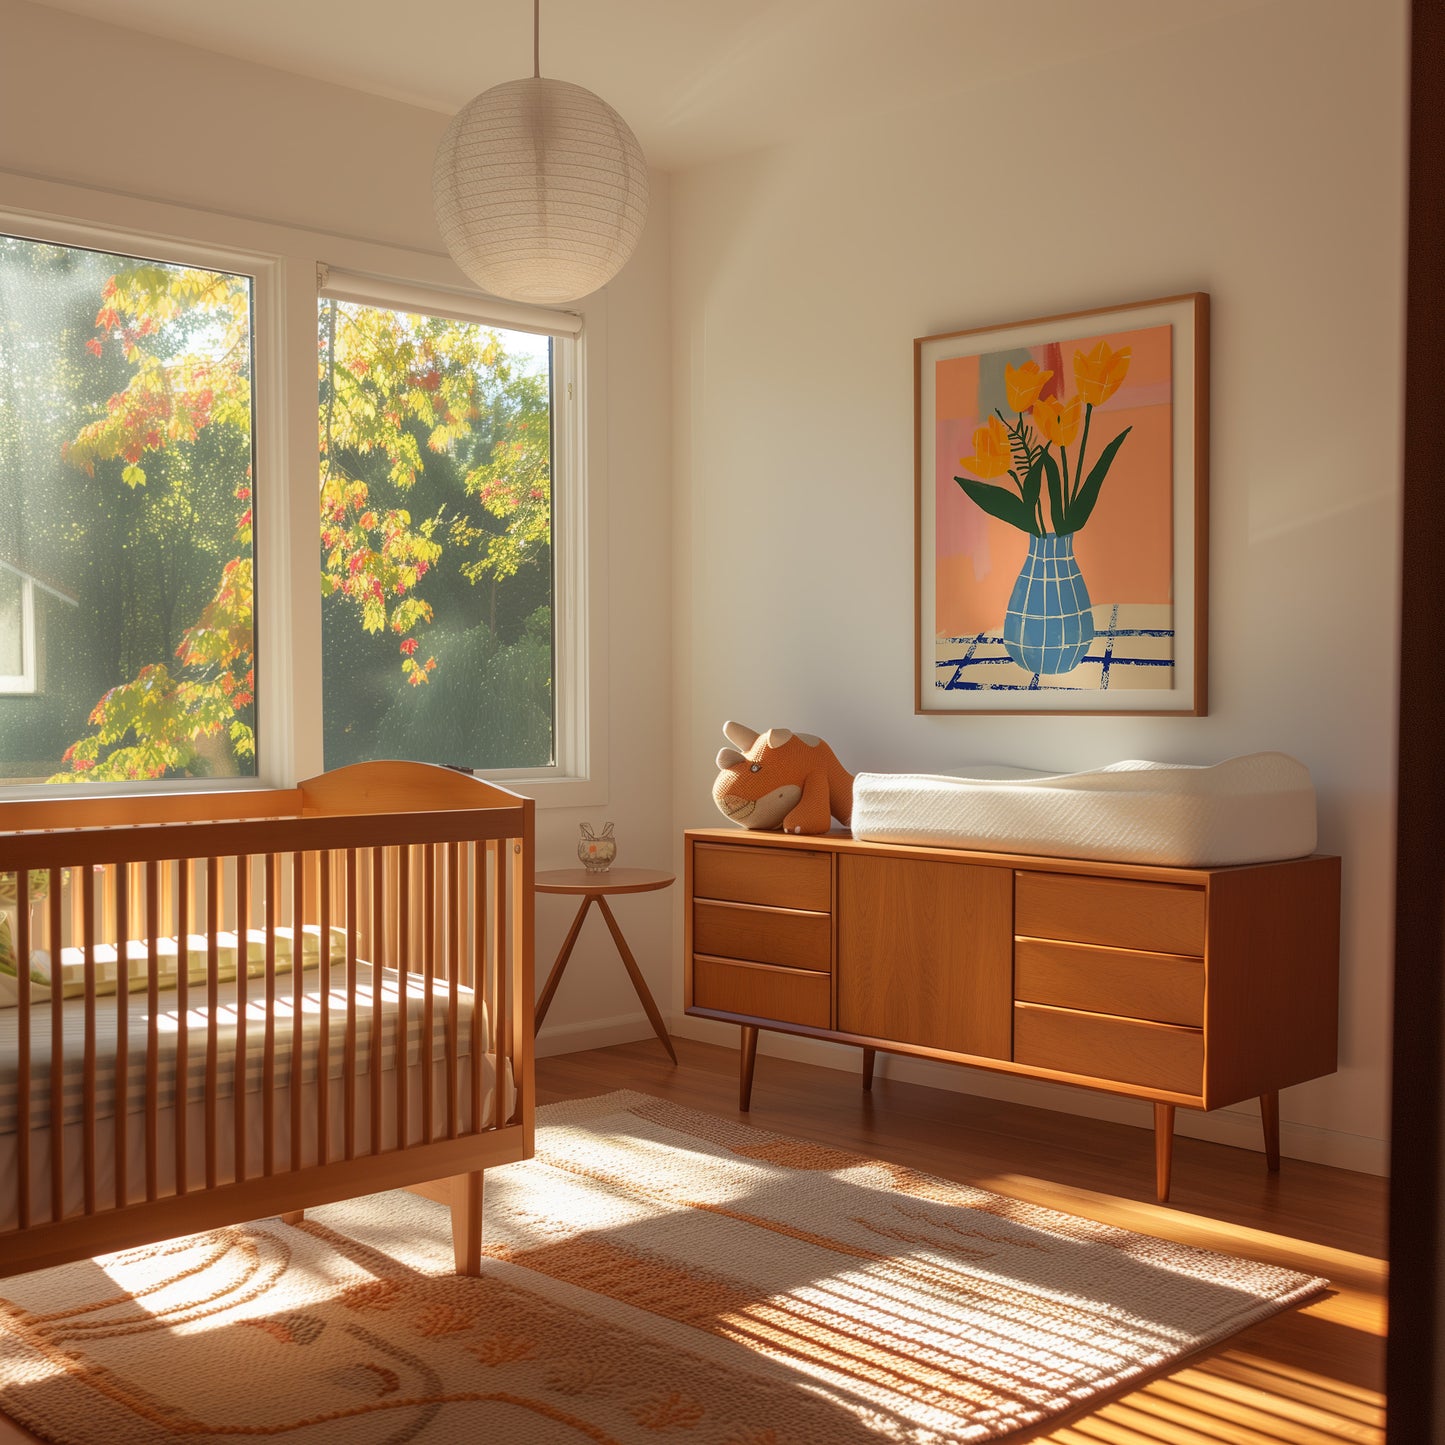 A cozy, sunlit bedroom with a wooden bed, dresser, and autumn view outside the window.